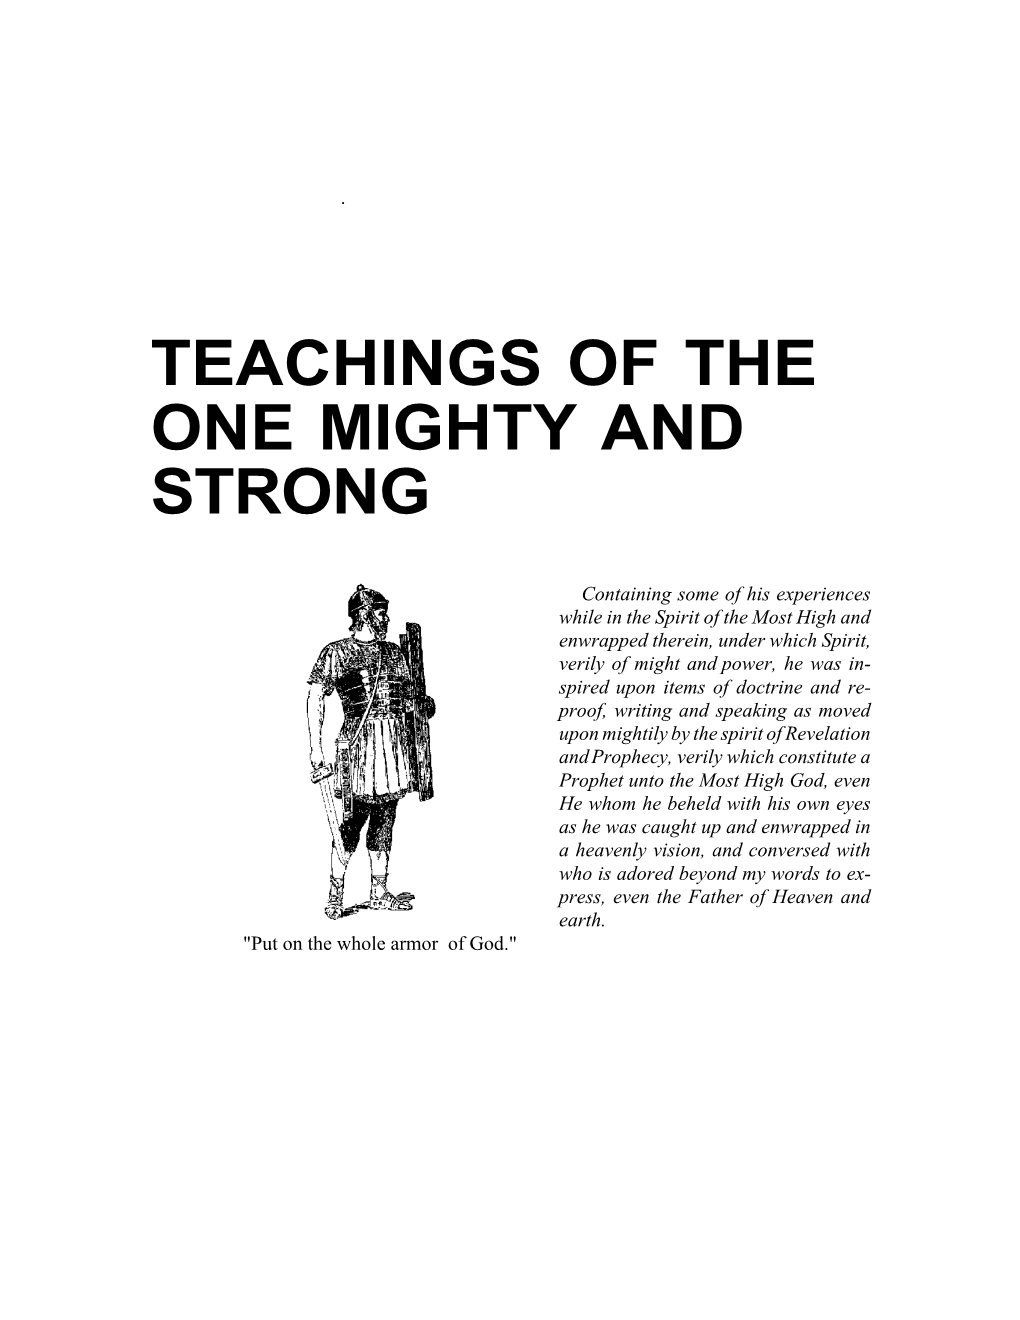 Teachings of the One Mighty and Strong